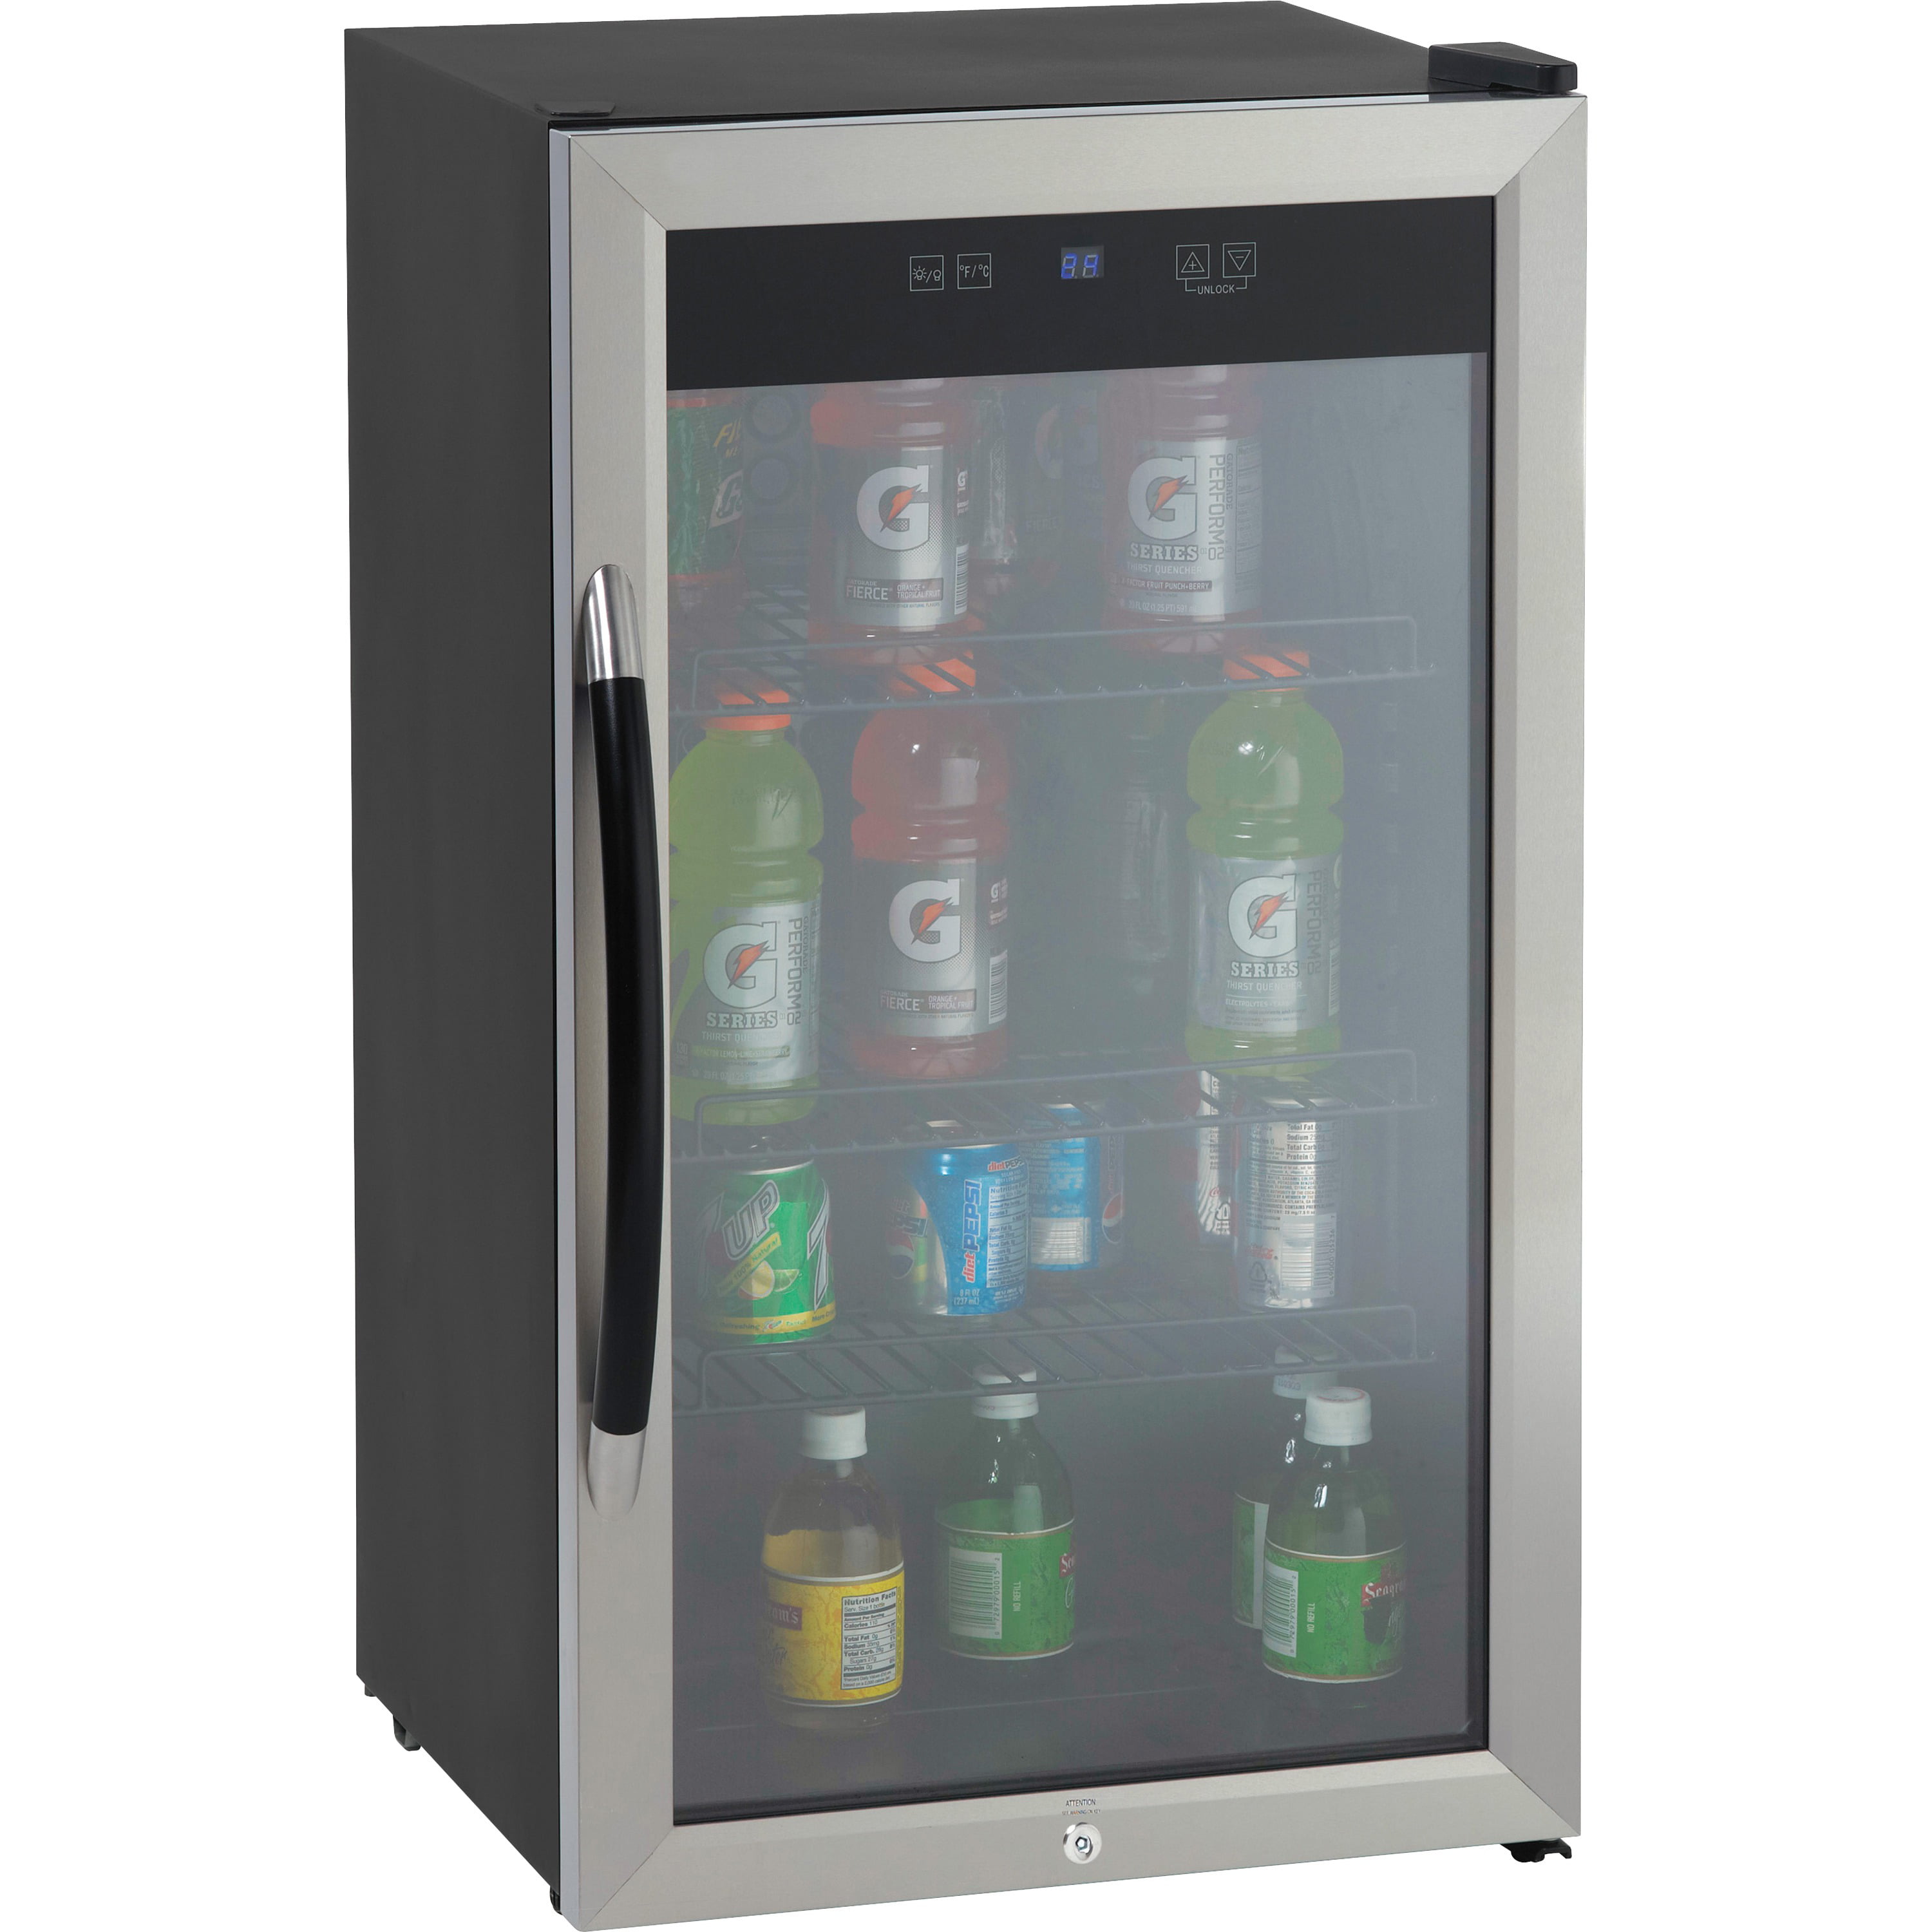 Auto Defrost Summit Appliance SPR489OSADA ADA Compliant Commercially Approved Shallow Depth Indoor/Outdoor Beverage Cooler for Built-in or Freestanding Use with Glass Door Black Cabinet